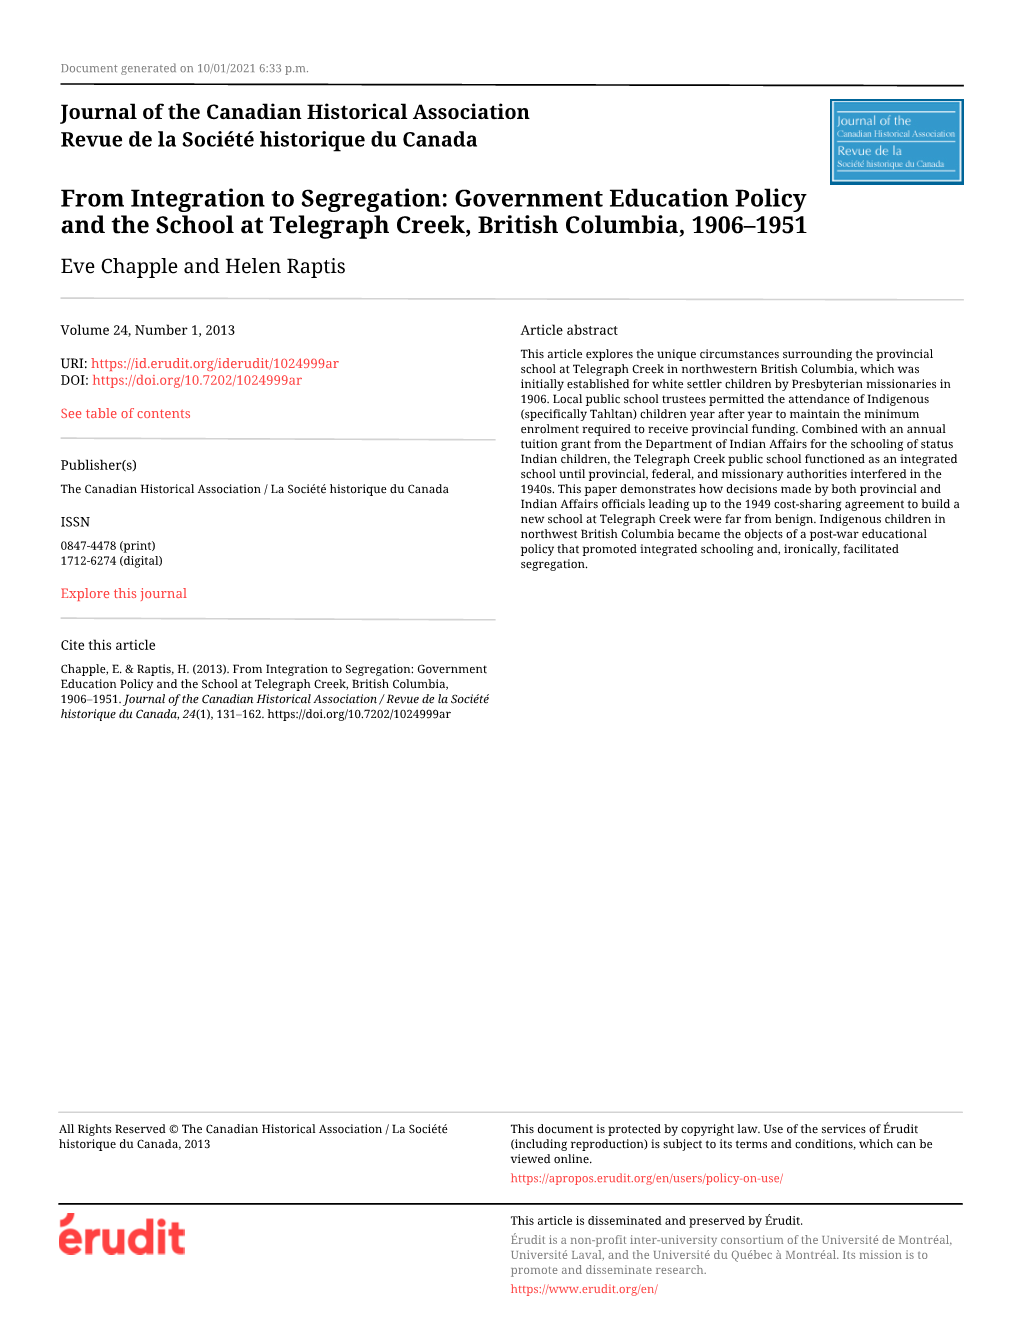 From Integration to Segregation: Government Education Policy and the School at Telegraph Creek, British Columbia, 1906–1951 Eve Chapple and Helen Raptis